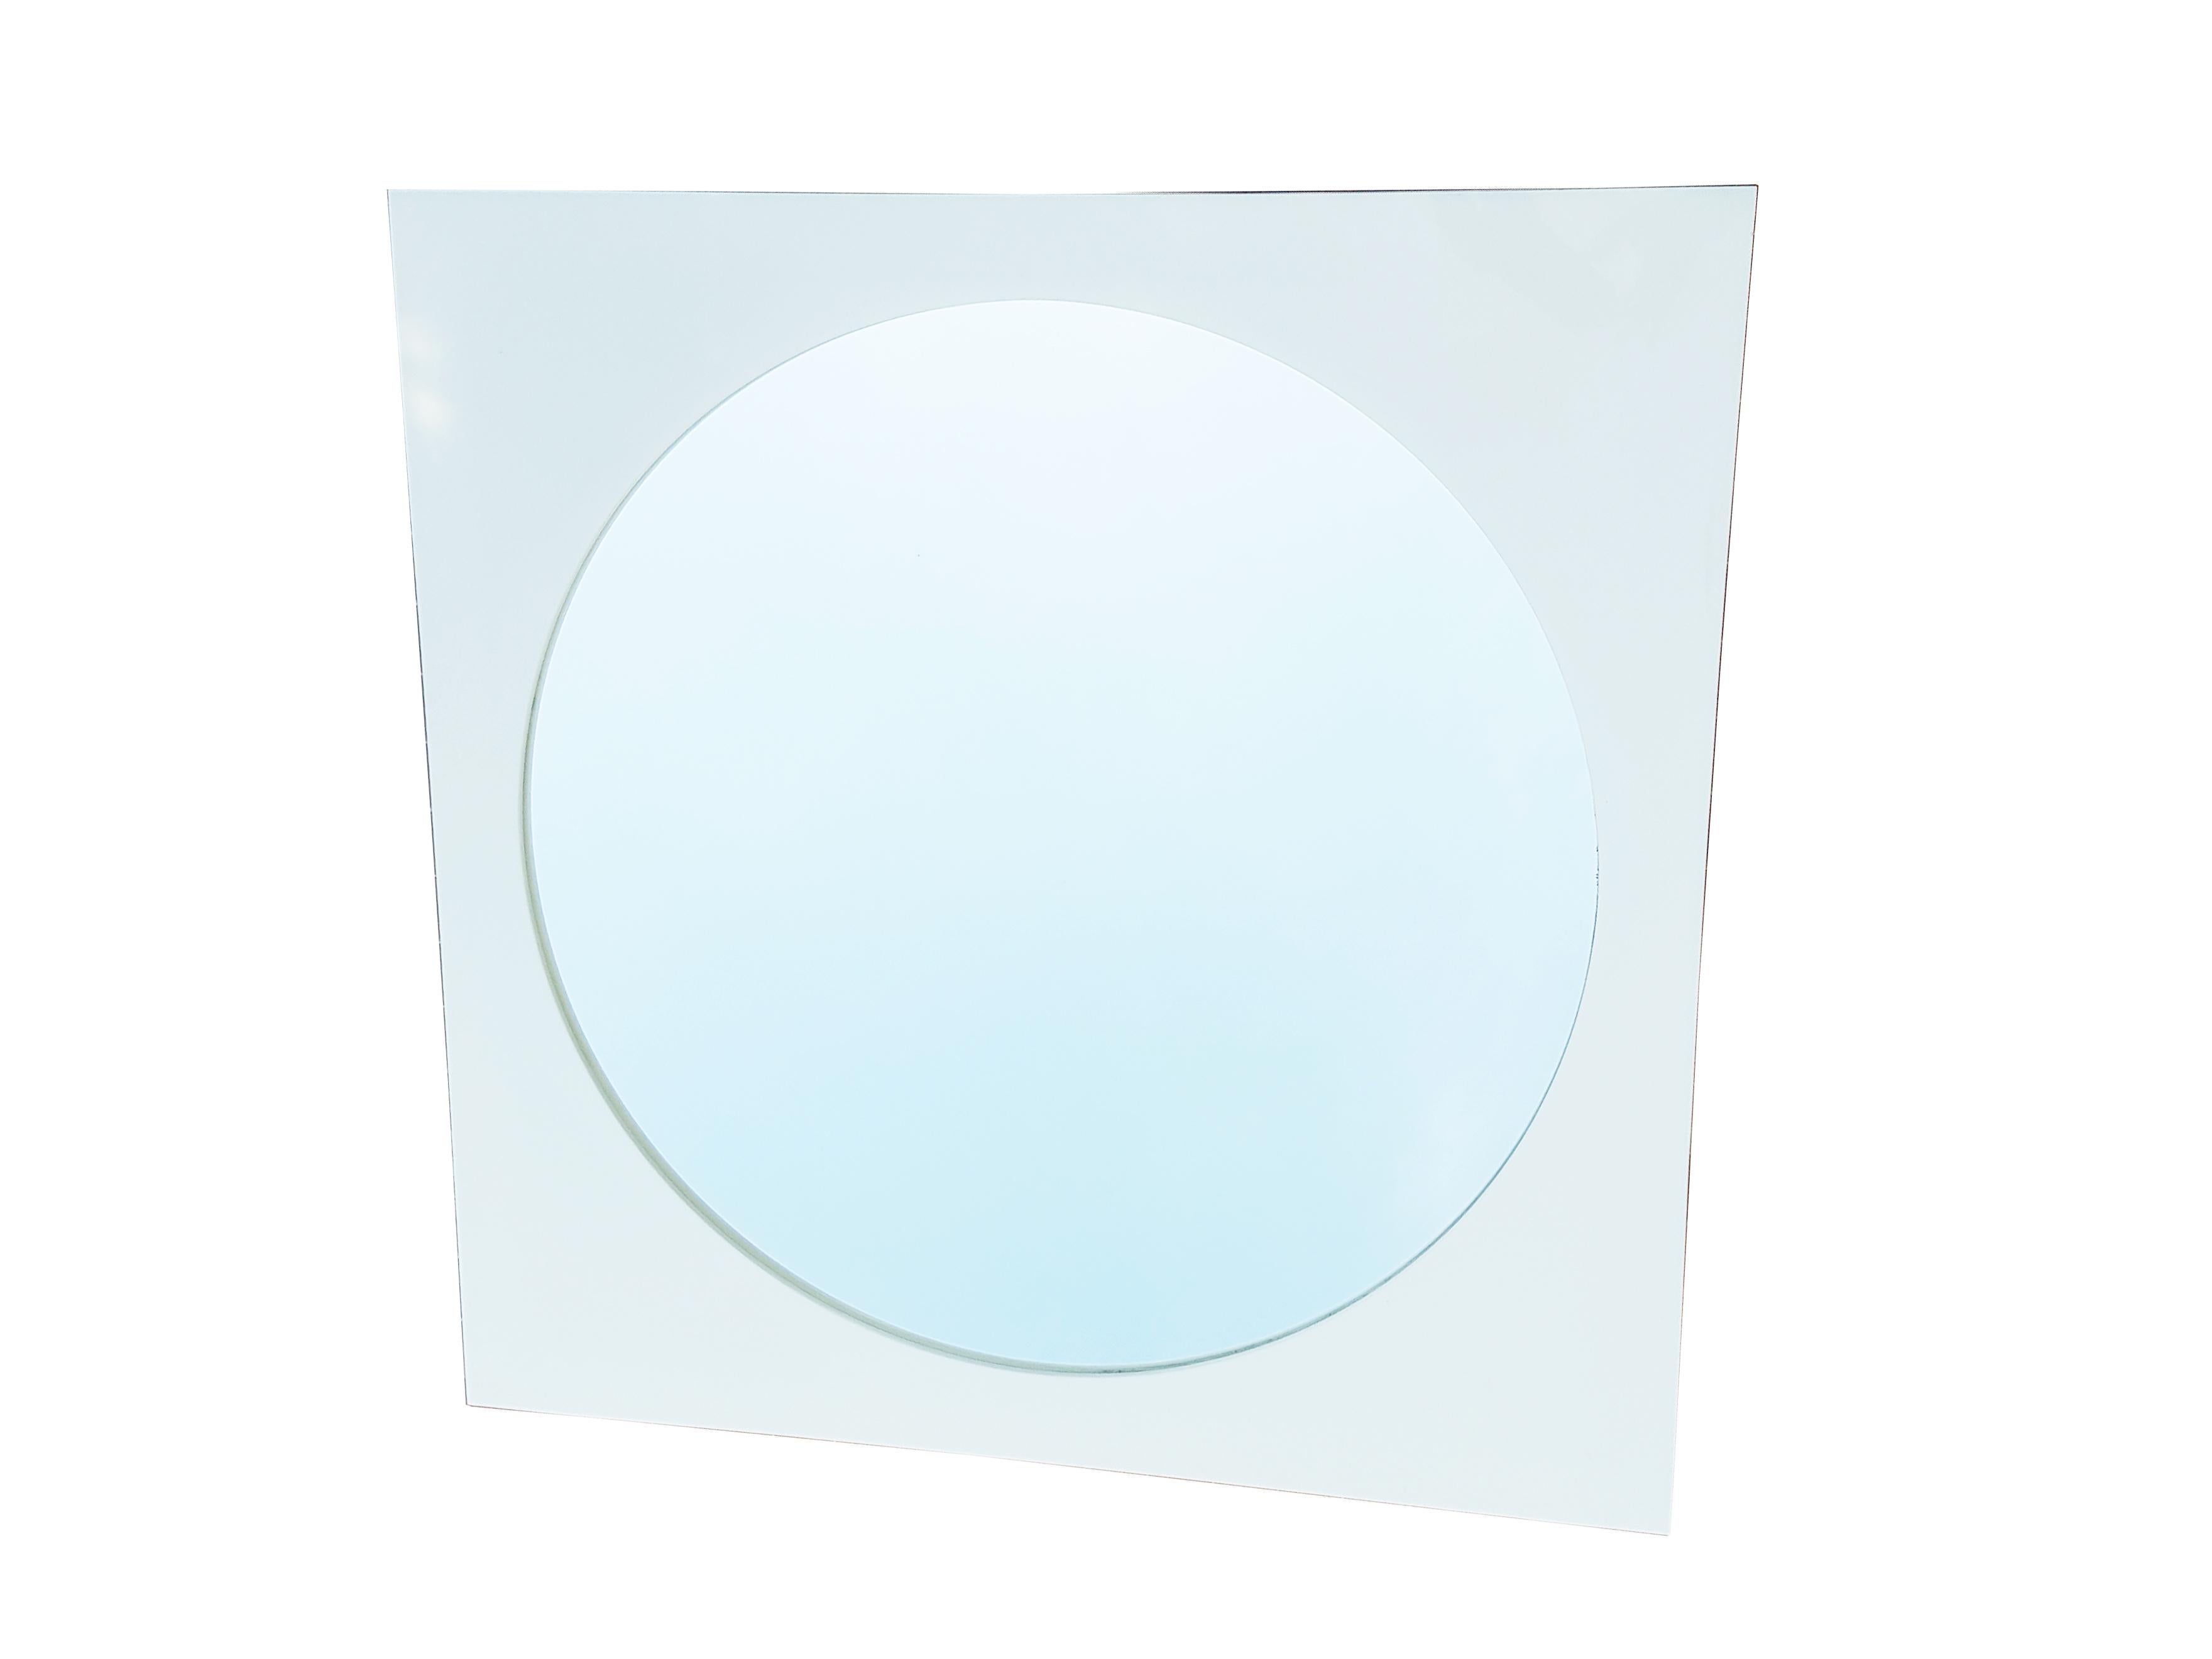 Late 19th Century White Methacrylate Square Mirror 4724/5 by G. Stoppino for Kartell For Sale